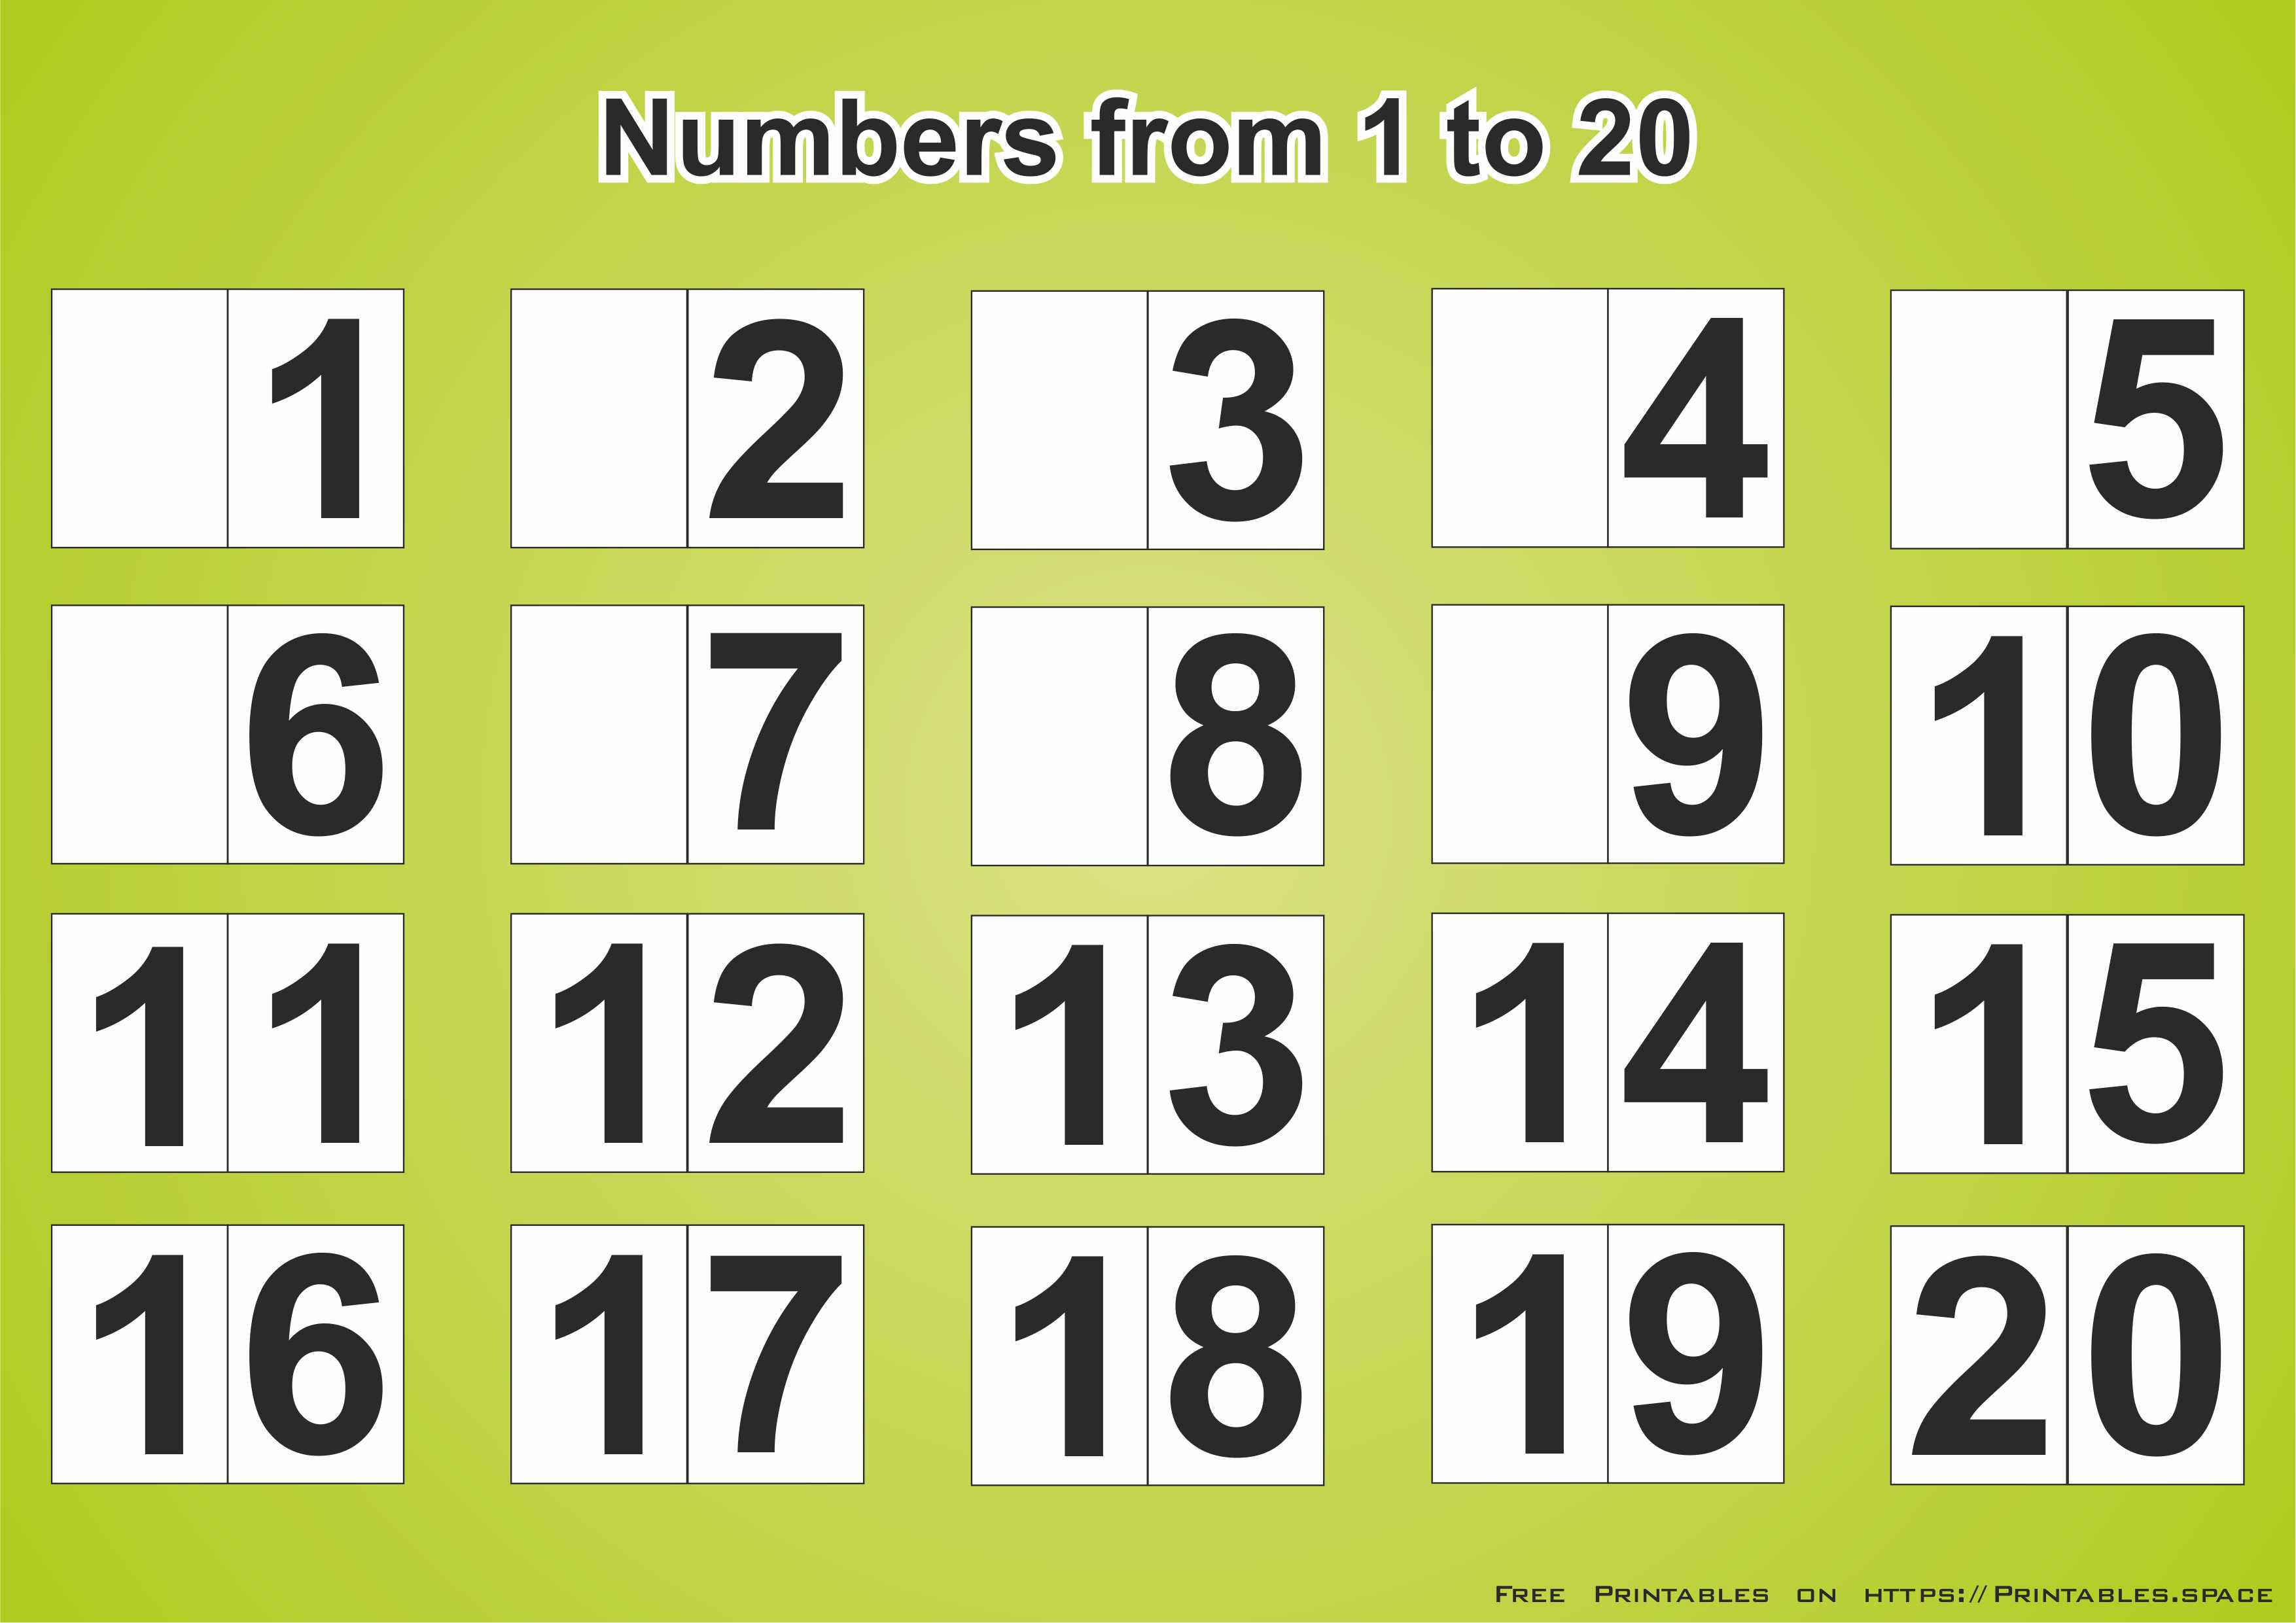 Free Download Printable Page With Numbers 1-20 - Free Printables - Free Printable Numbers 1 20